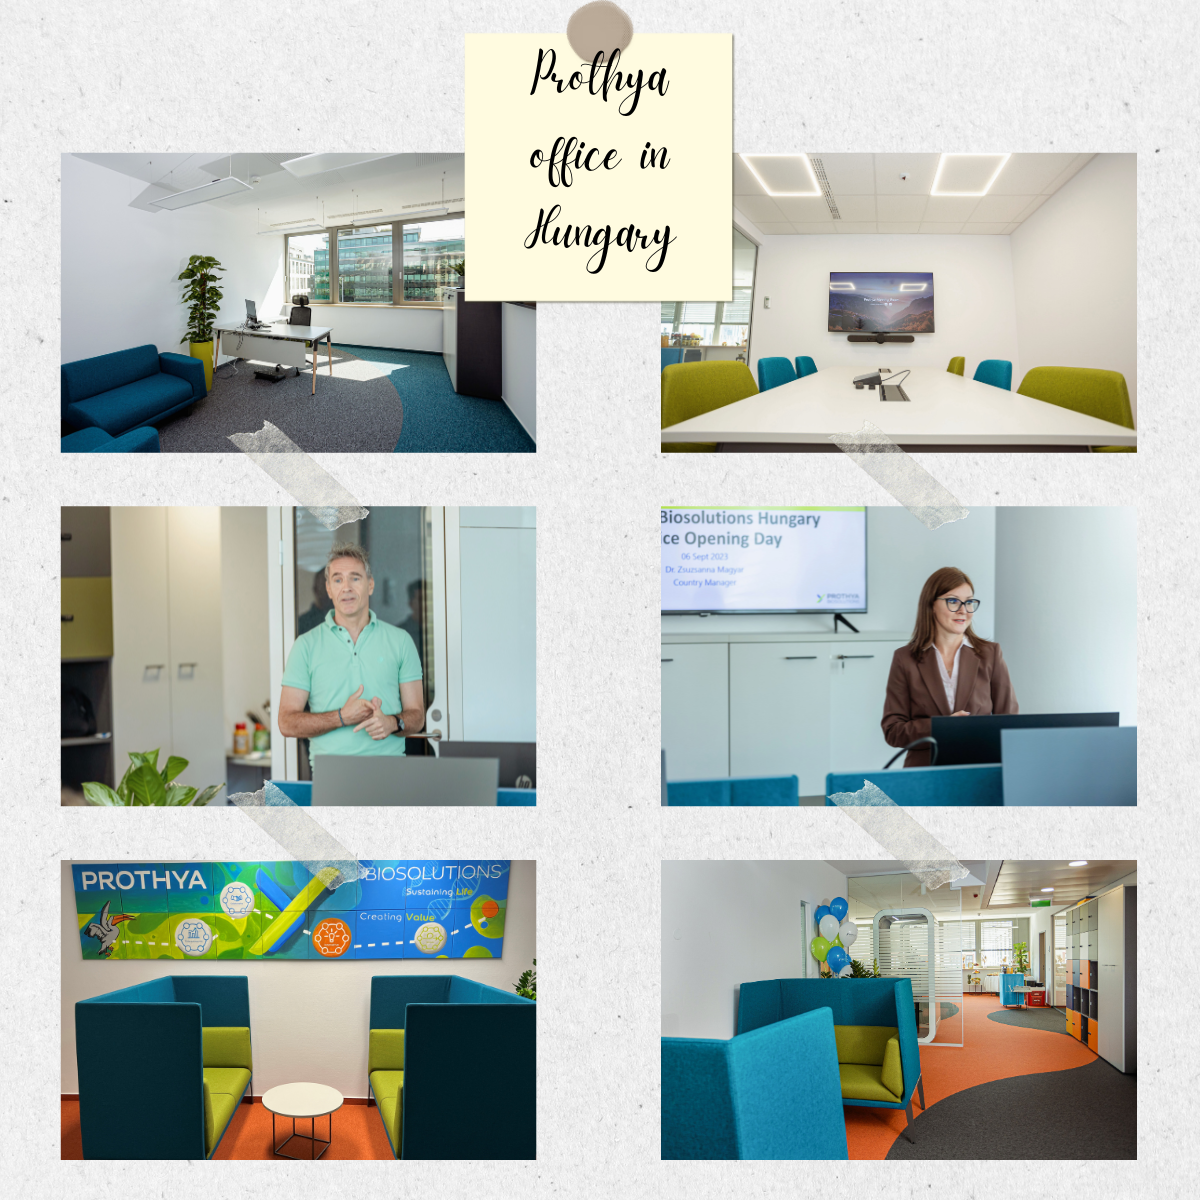 Prothya Hungary opens a new officeimage